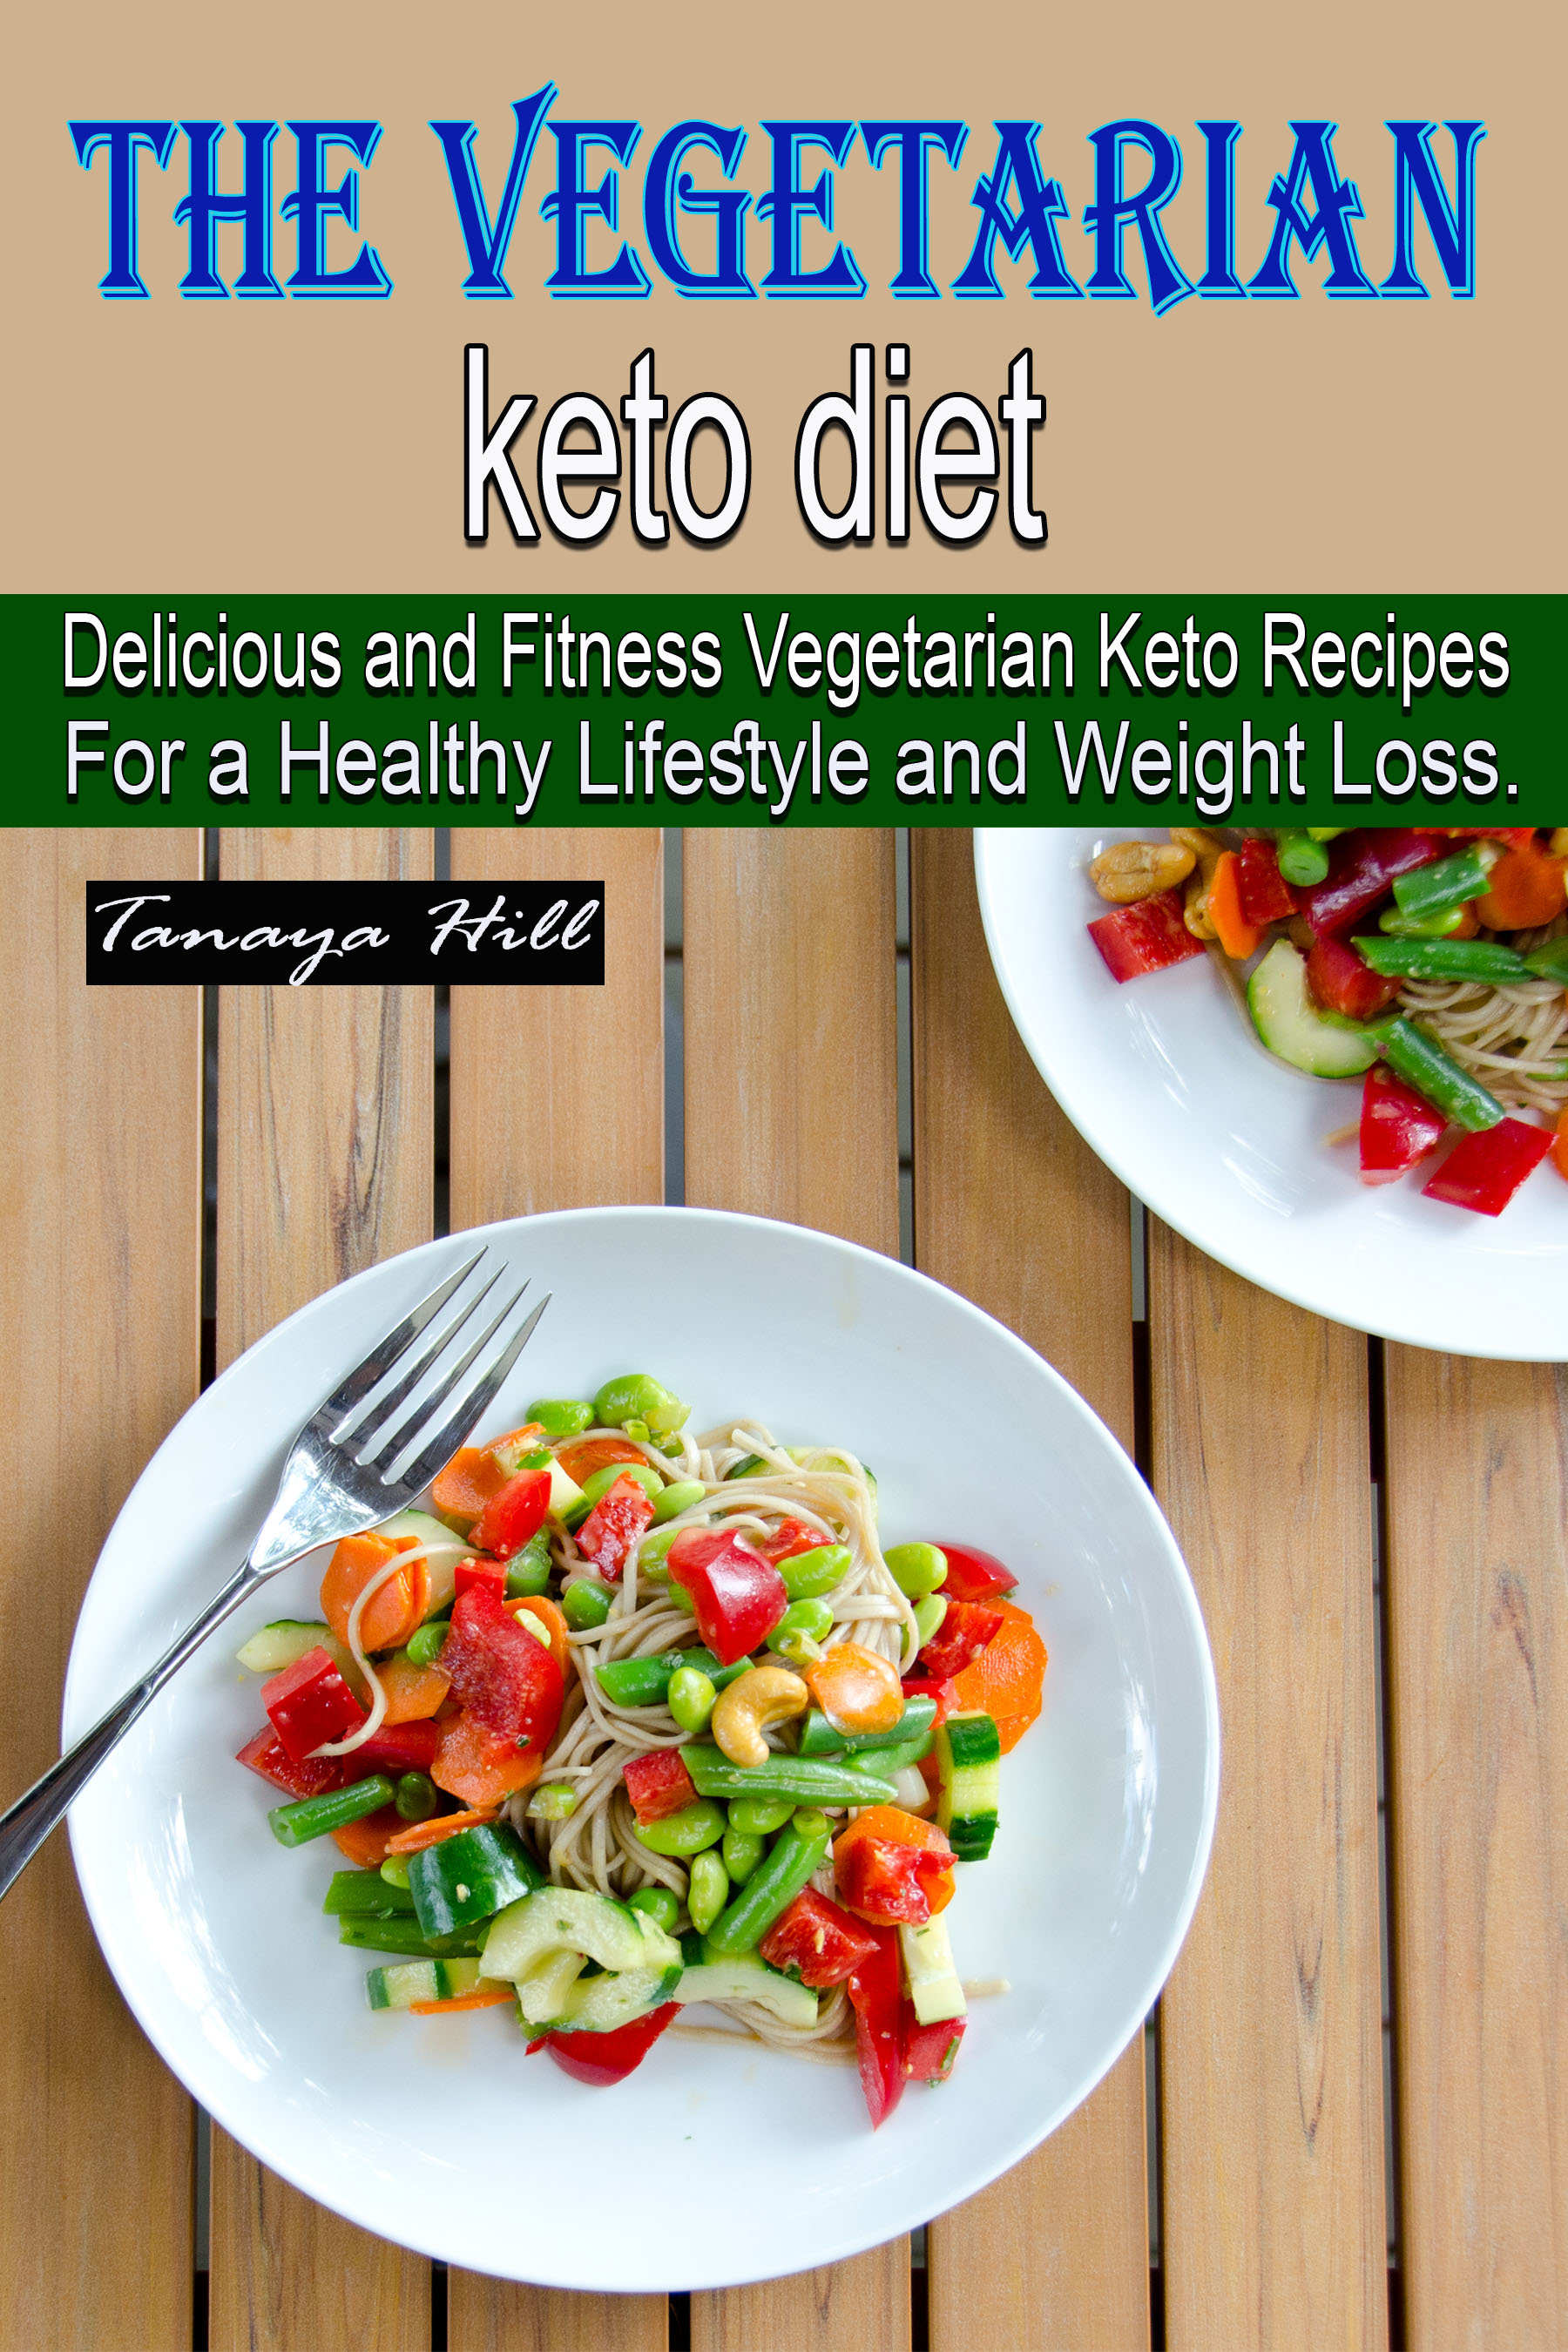 FREE: The vegetarian keto diet:Delicious and Fitness Vegetarian Keto Recipes For a Healthy Lifestyle and Weight Loss. by Tanaya Hill